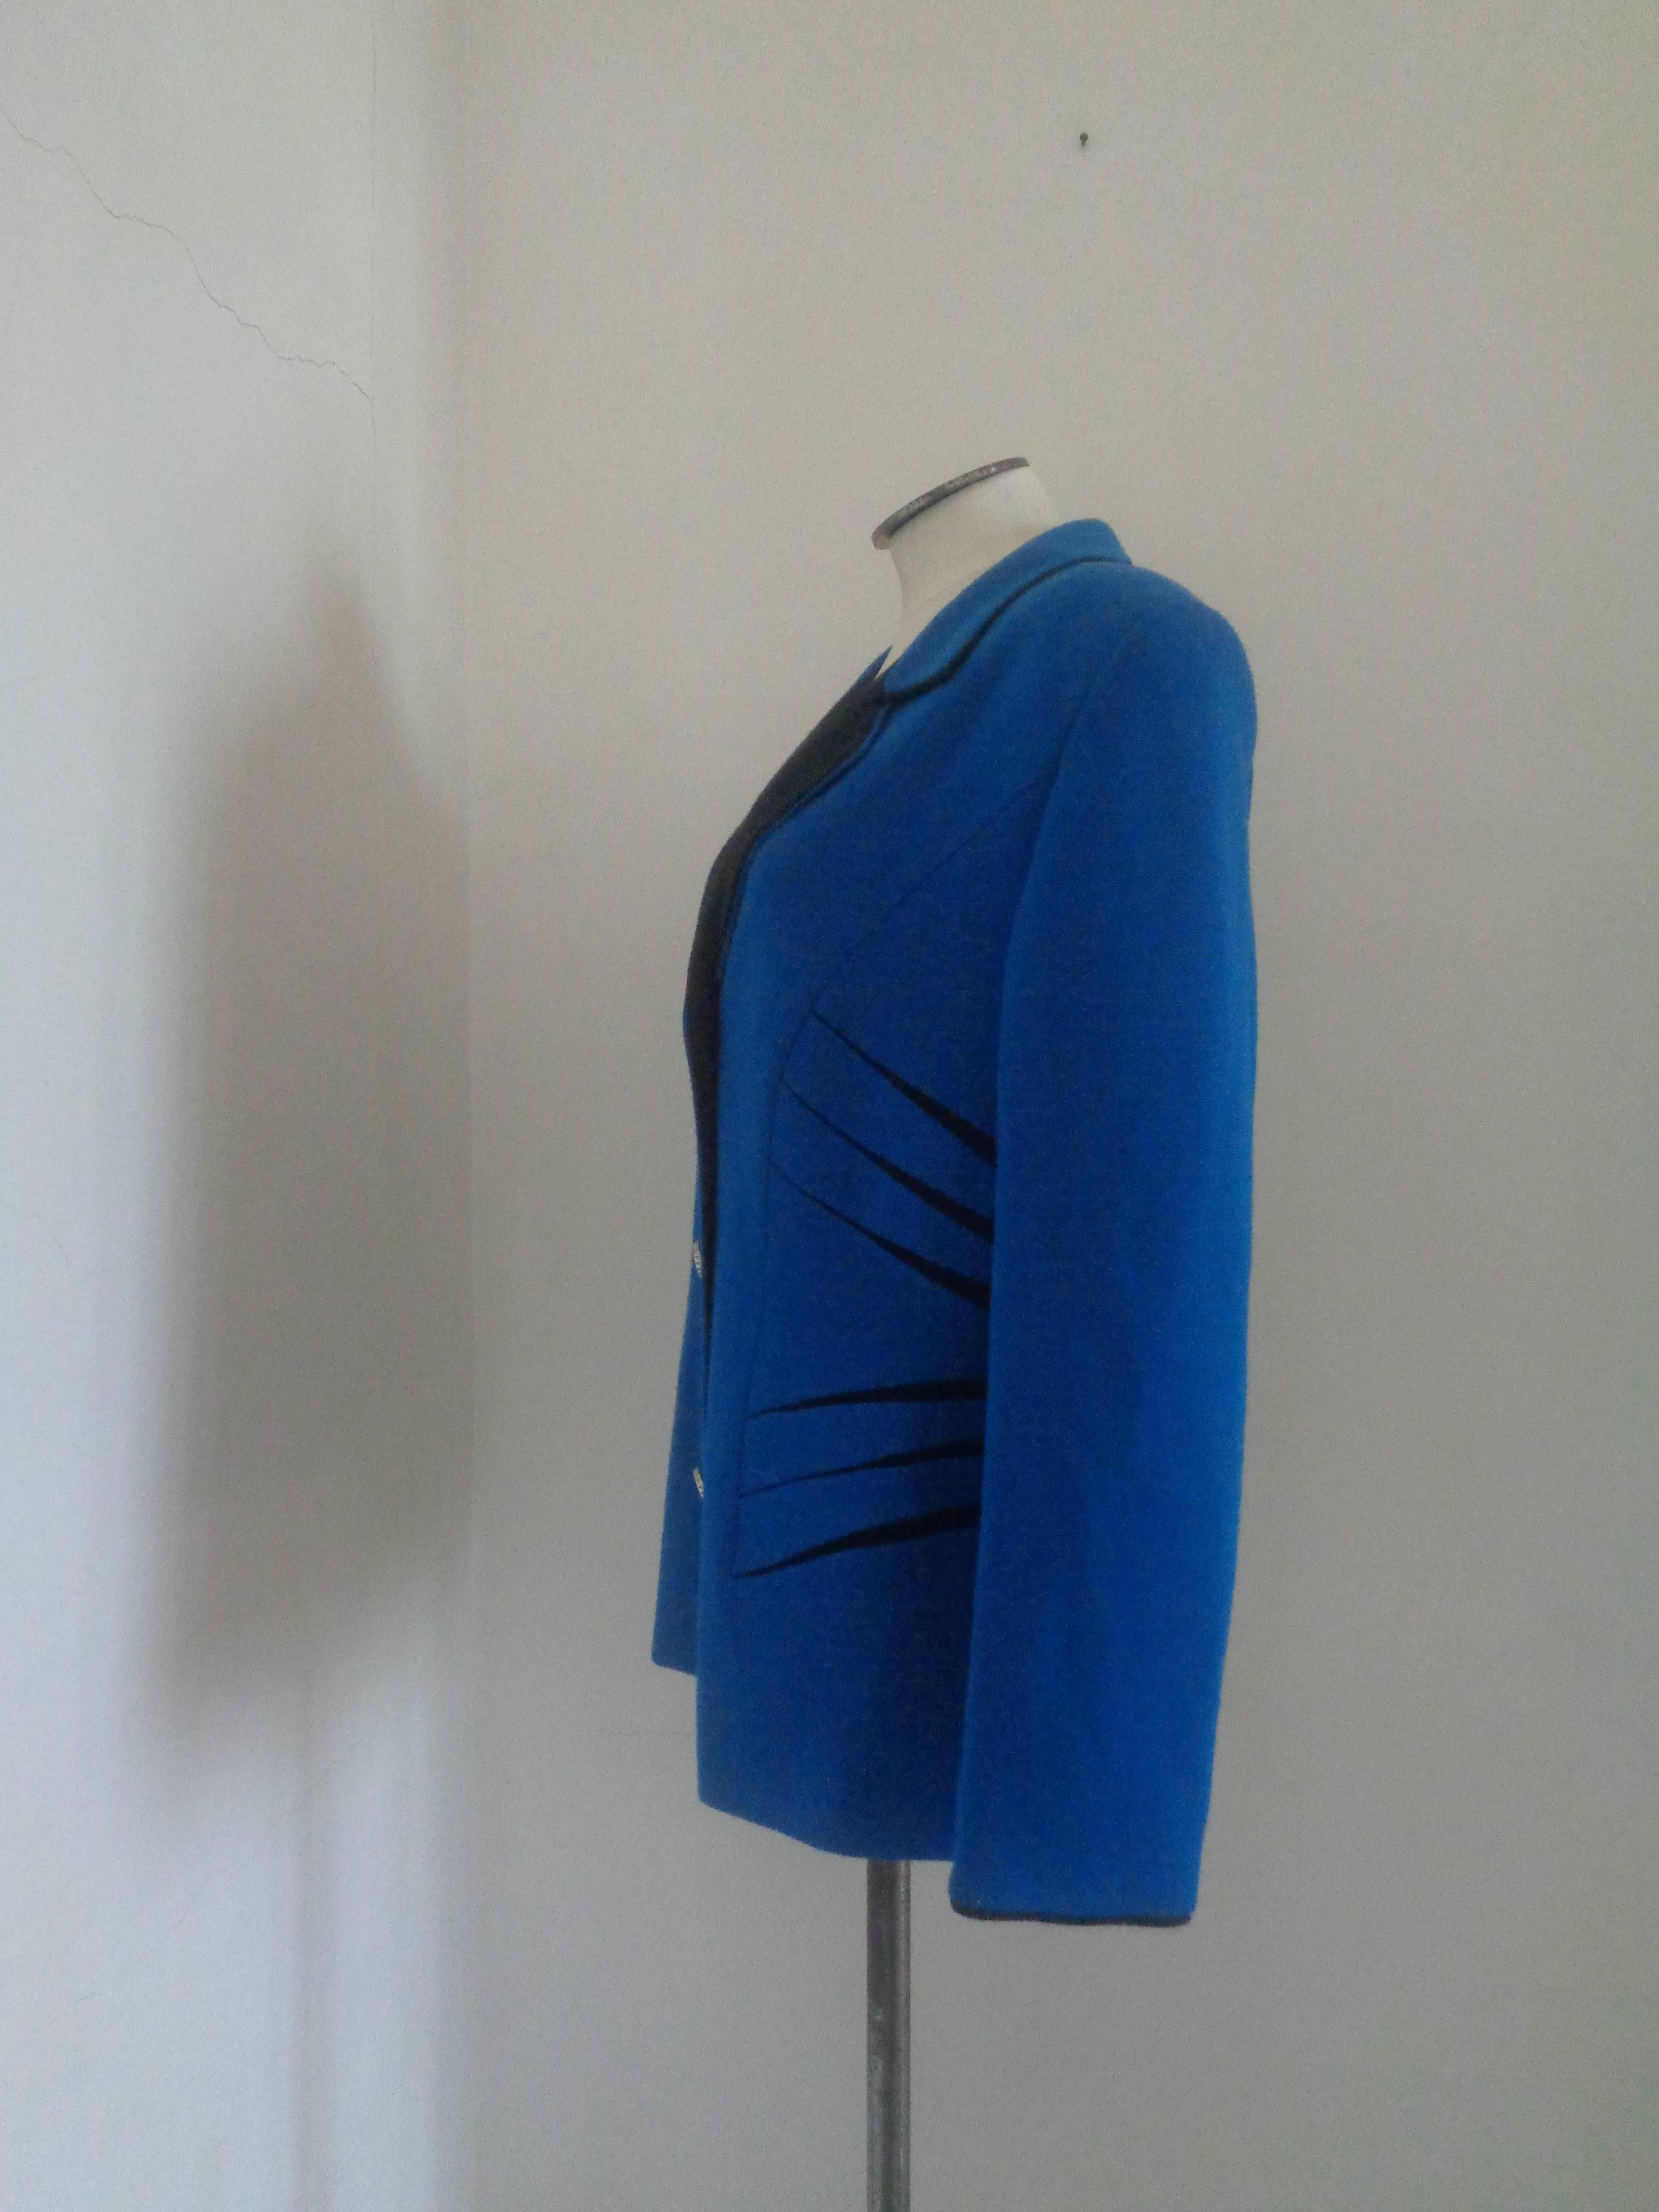 Pierre Cardin Blu and Black Wool Jacket

Totally made in italy in size 46

